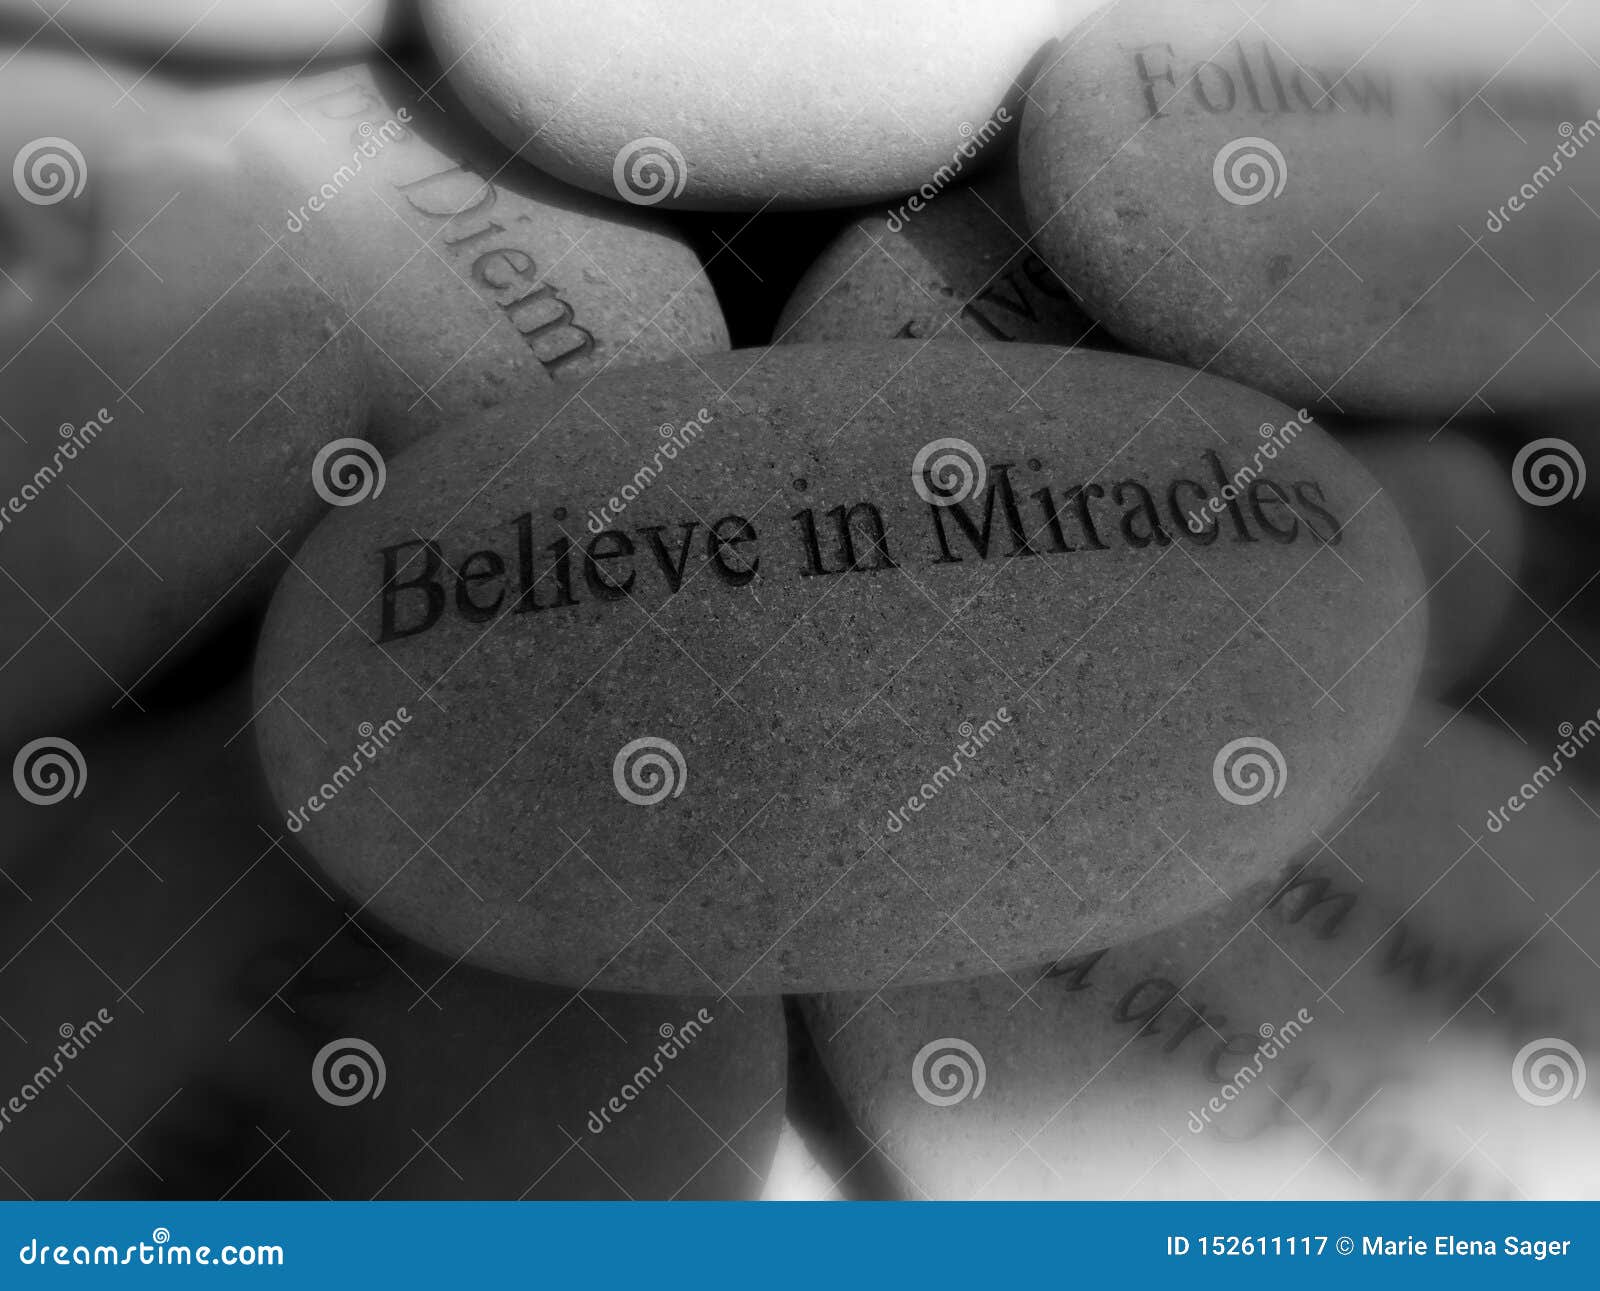 believe in miracles stone